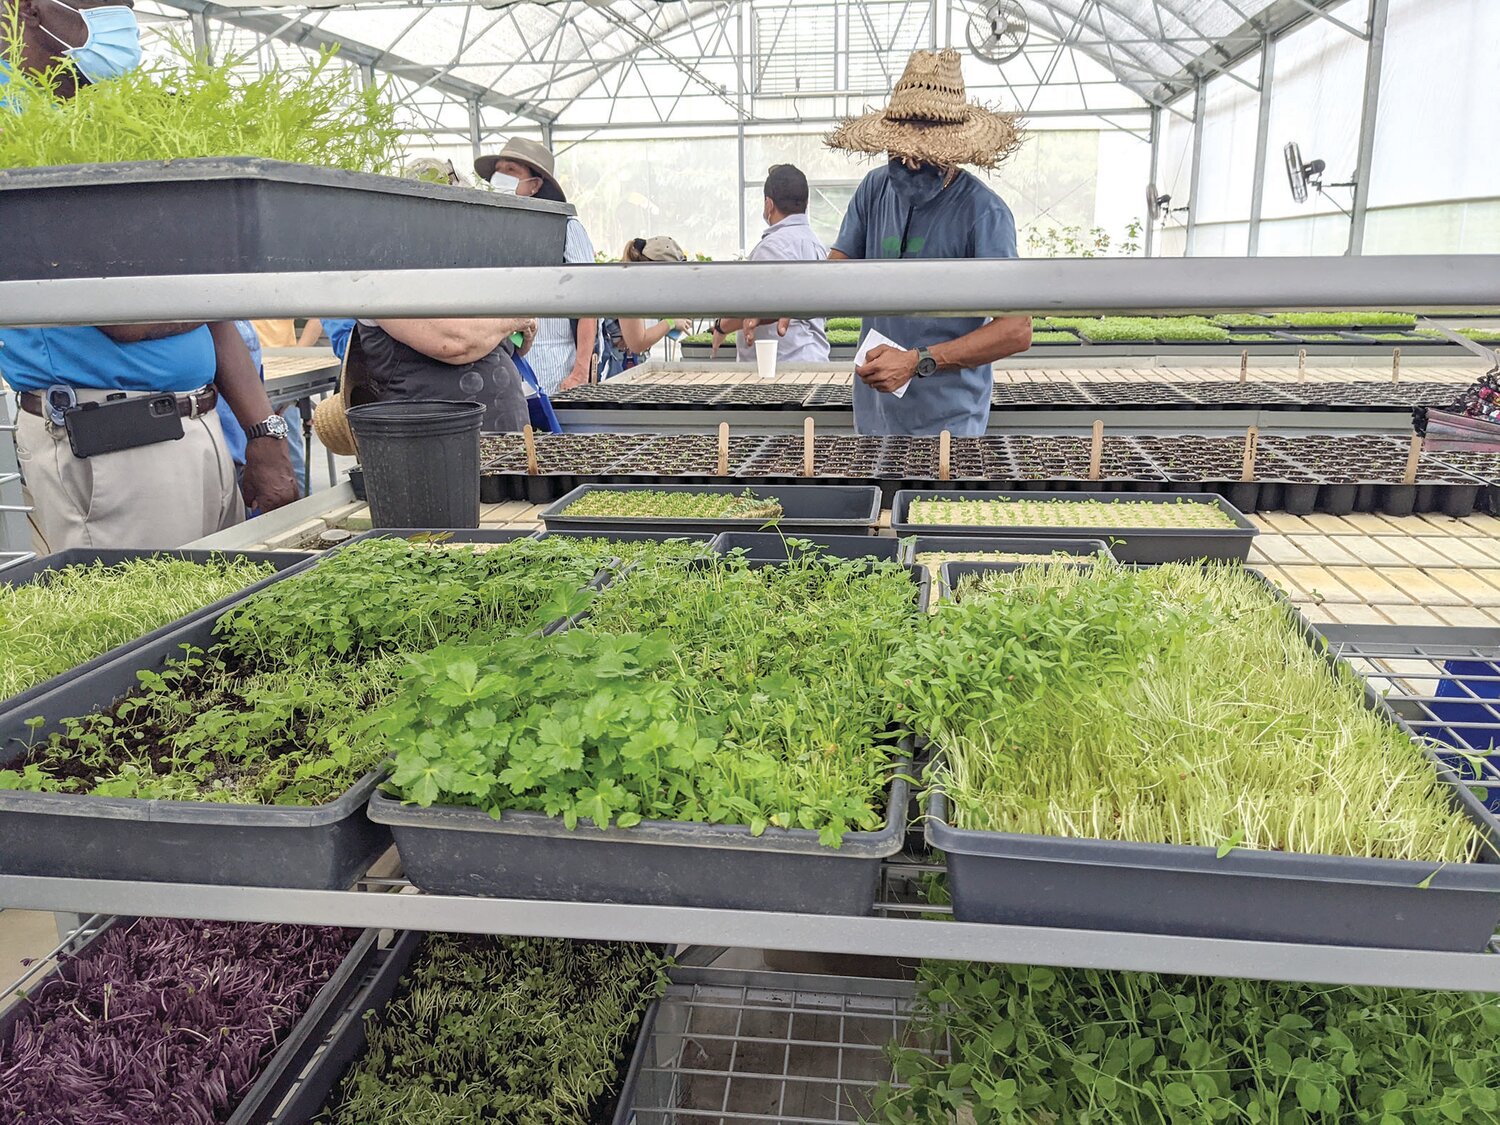 A look at the microgreens grown in this urban farm greenhouse at the Harpke Family Farm.